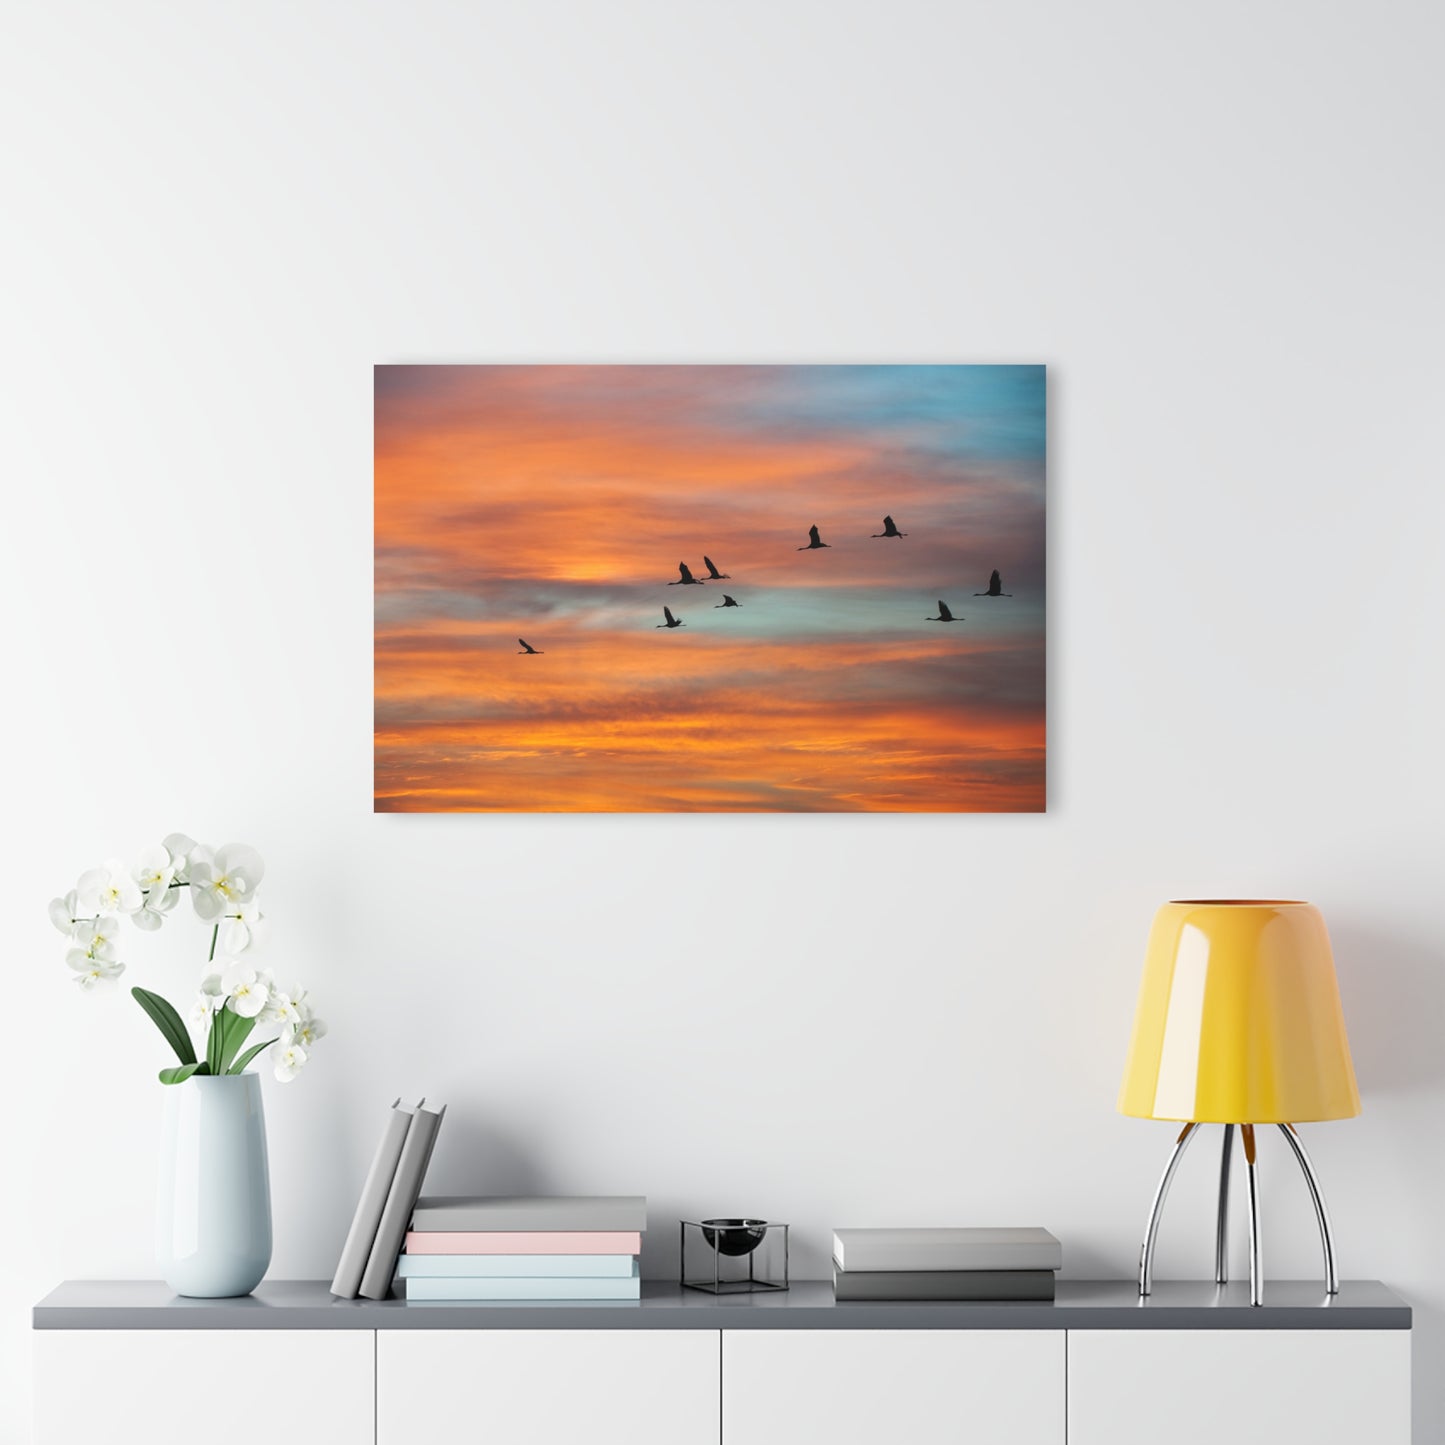 Migrating Cranes at Sunrise by Yehoshua Halevi - Photograph on Glossy Acrylic (French Cleat Hanging)